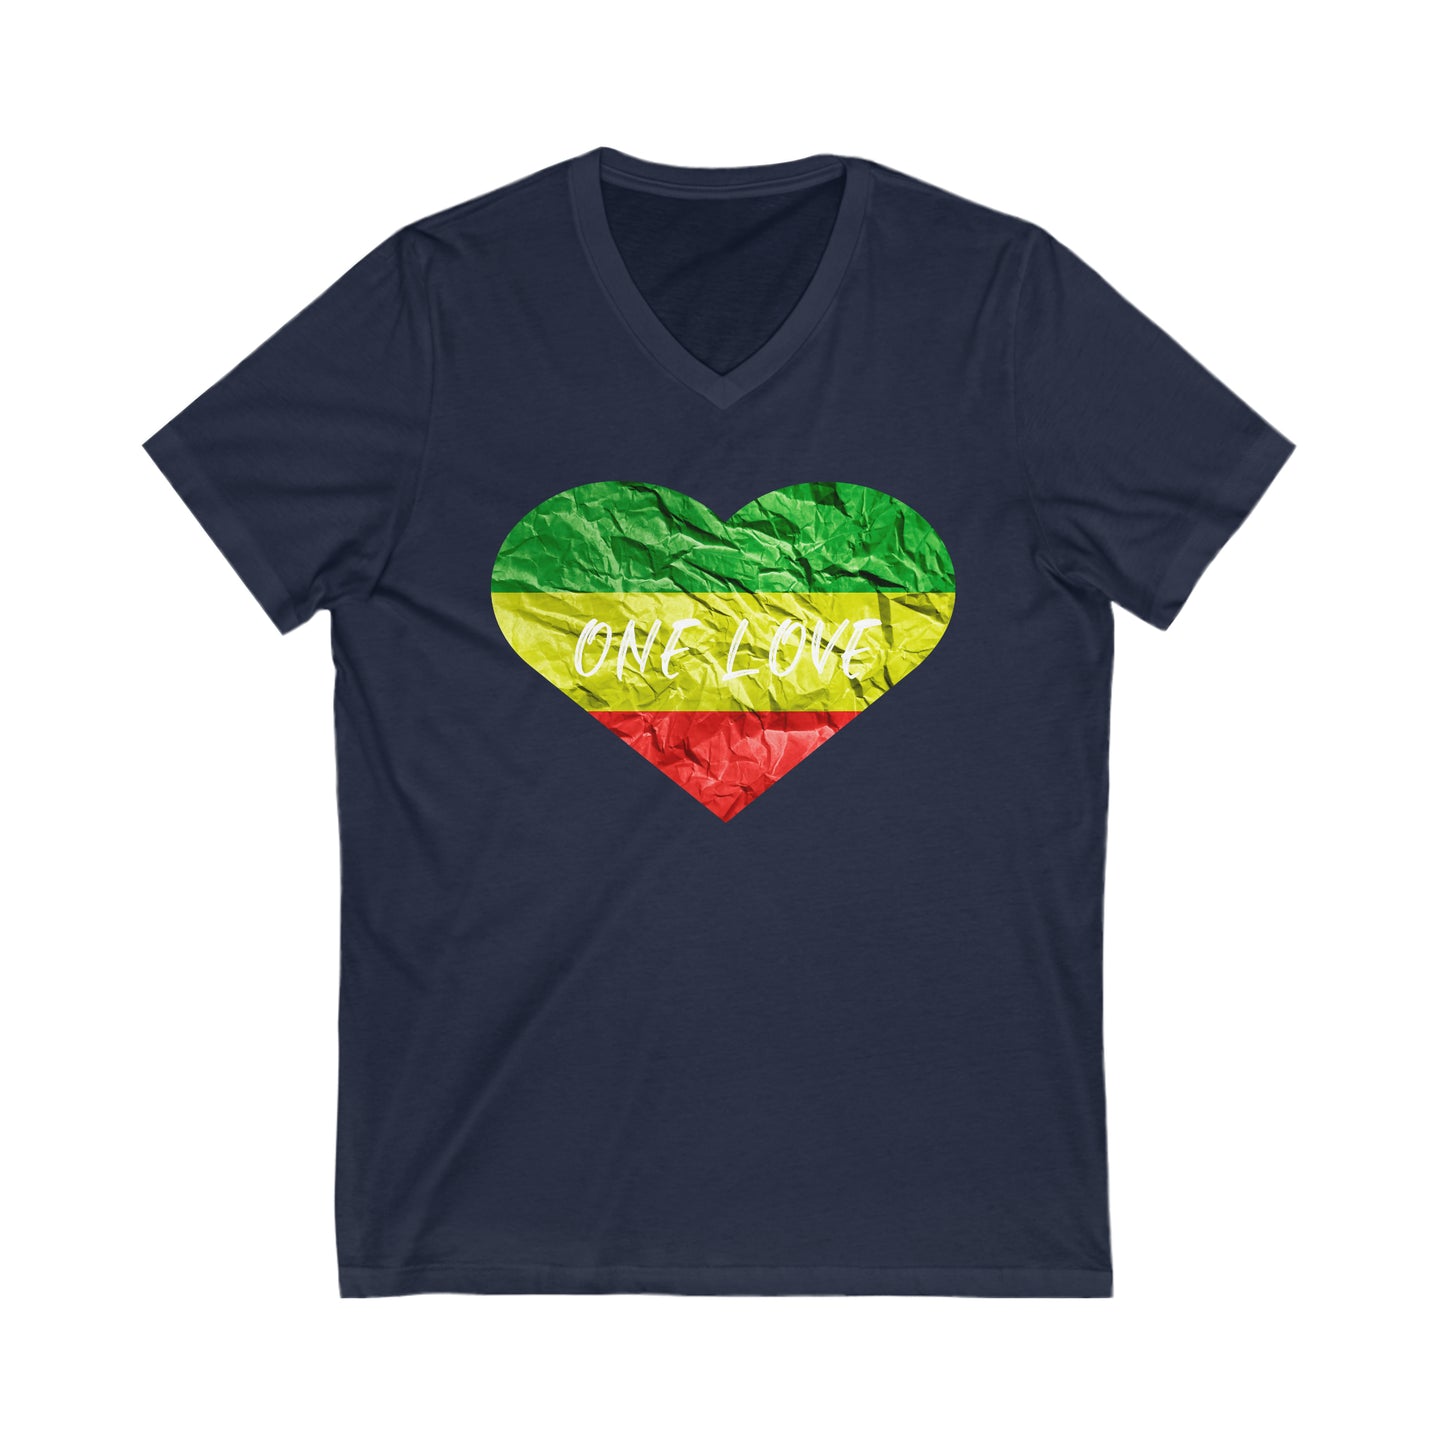 IRIE VYBEZ ITES COLOR HEART DESIGN V NECK TEE SHIRT GIFT